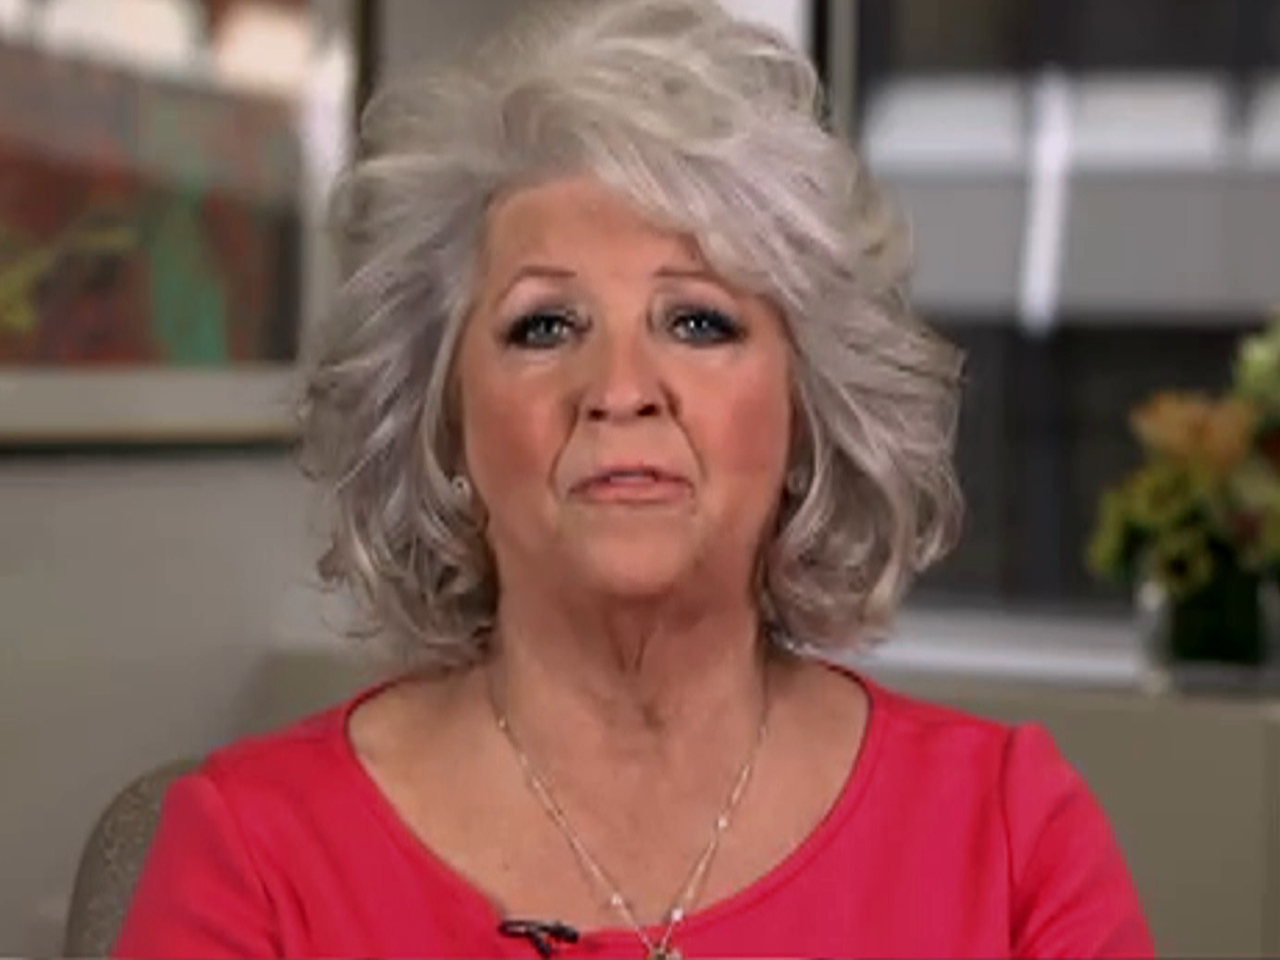 New Paula Deen website will include documentary about downfall